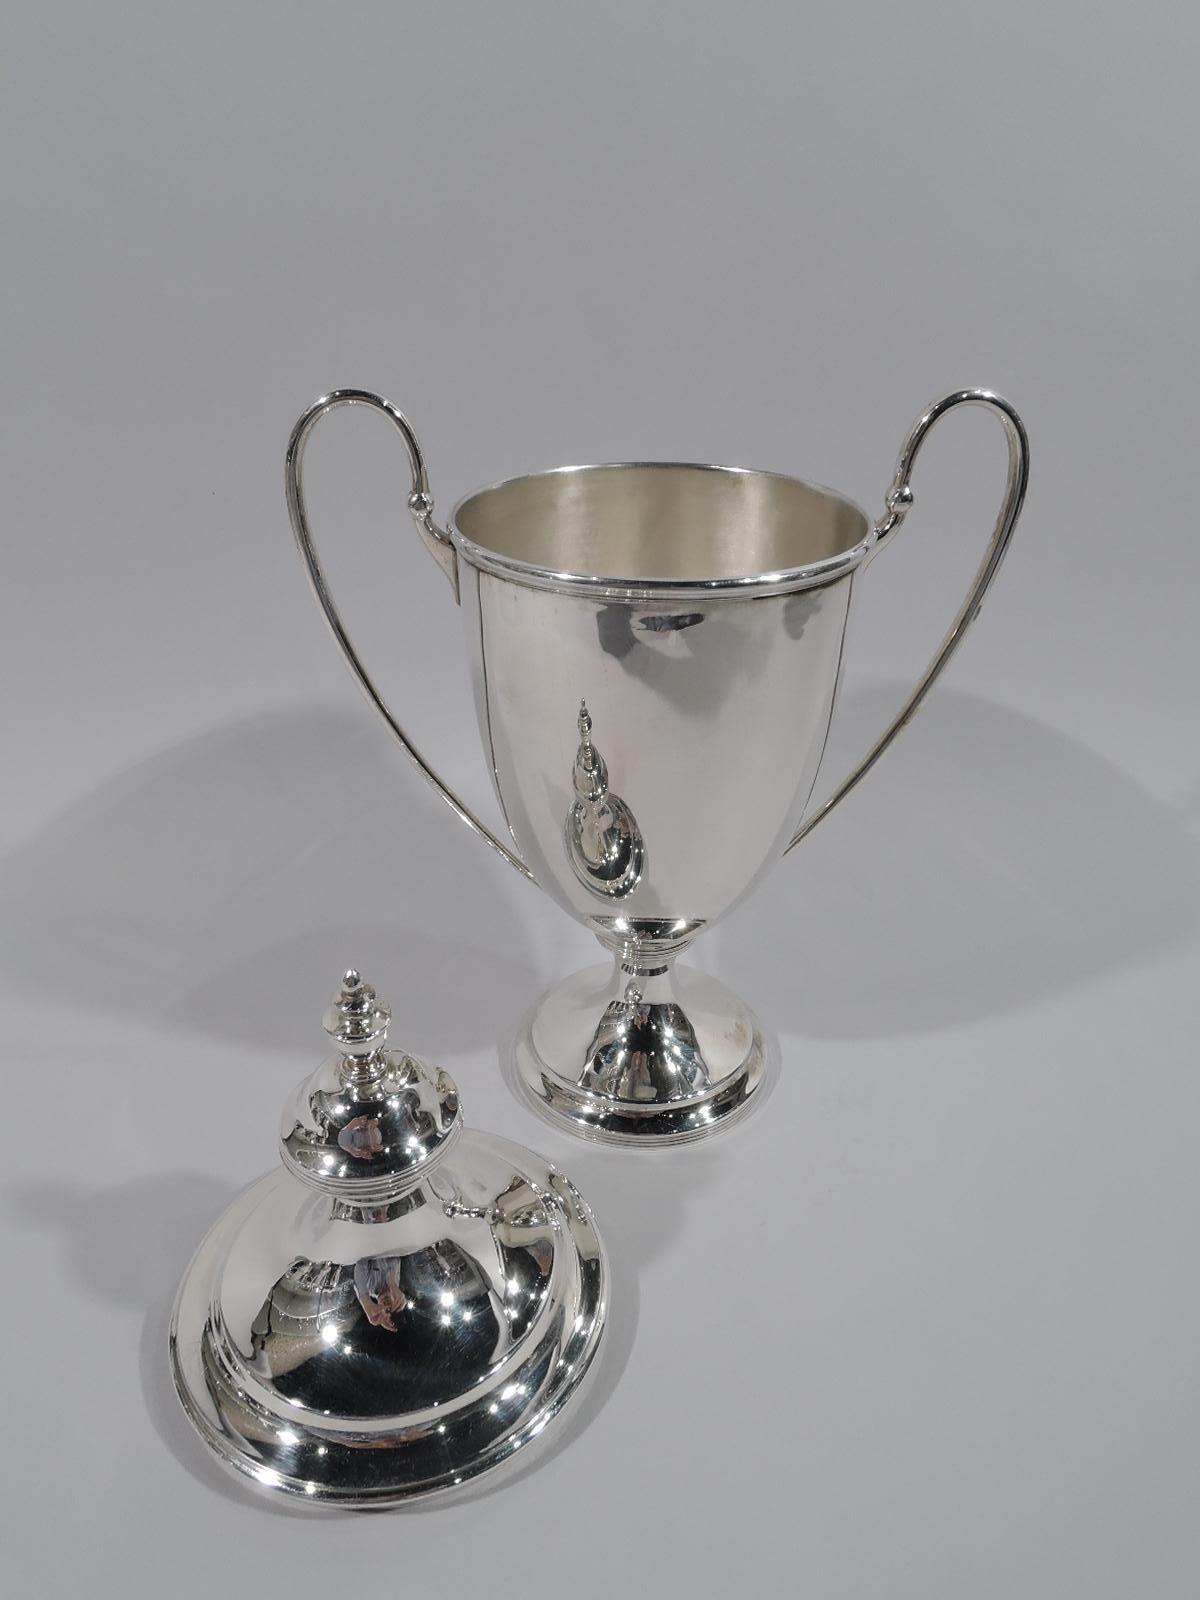 Victorian sterling silver trophy cup. Made by Daniel & John Wellby in London in 1893. Amphora urn with high-looping side handles and stepped foot. Double-domed cover with self-referencing vase-finial. Reeding. A very nice understated winner’s cup.